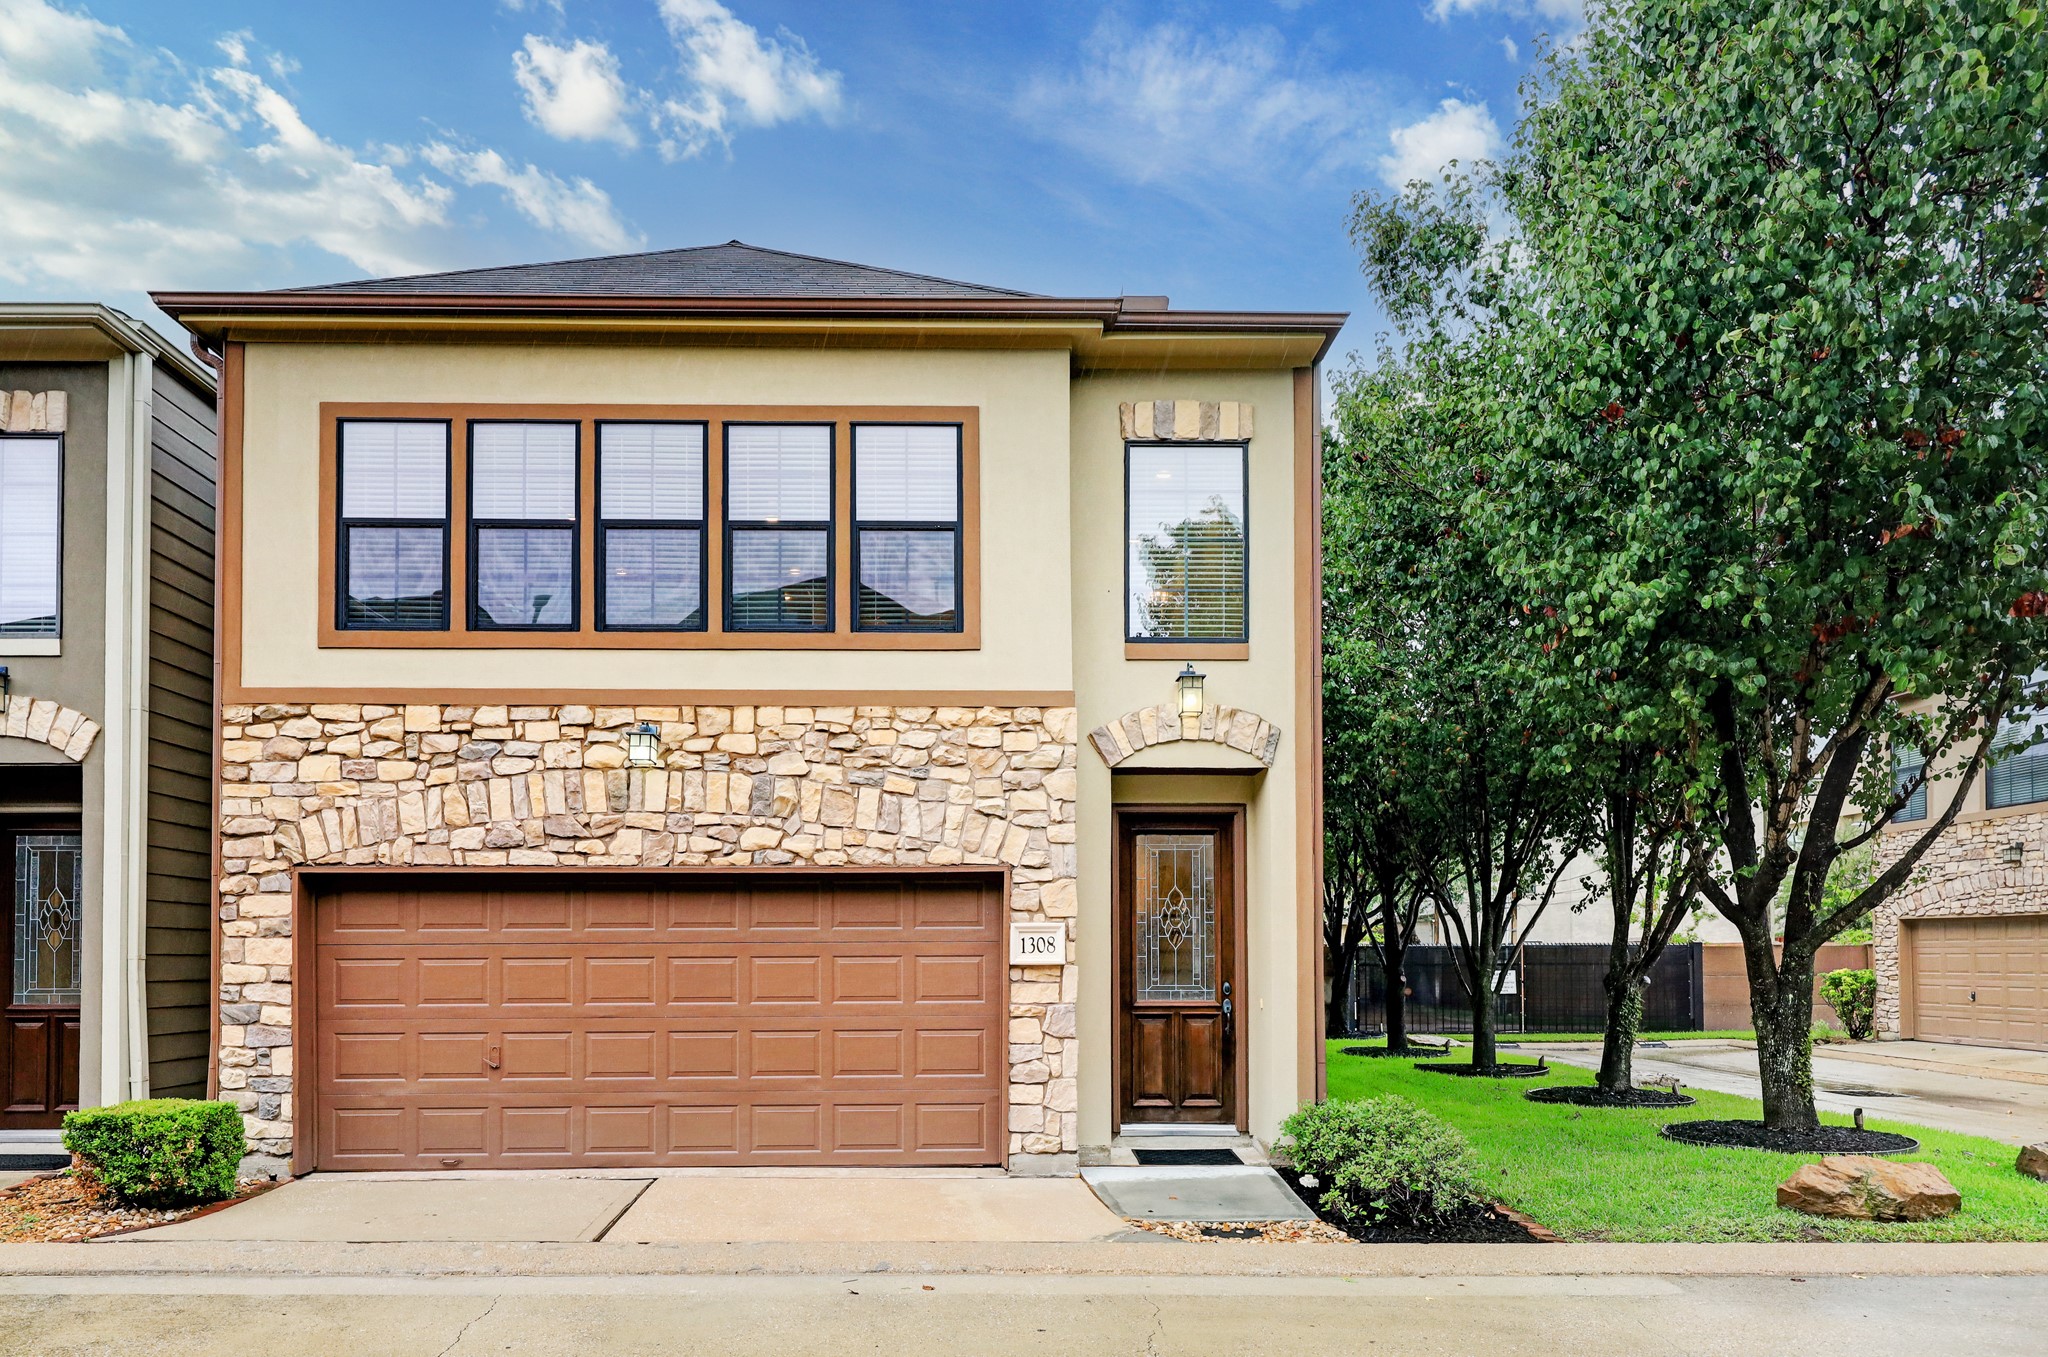 Welcome to 1308 Studer: a welcoming 2 bed/2 bath home located in a highly desirable Rice Military gated community!